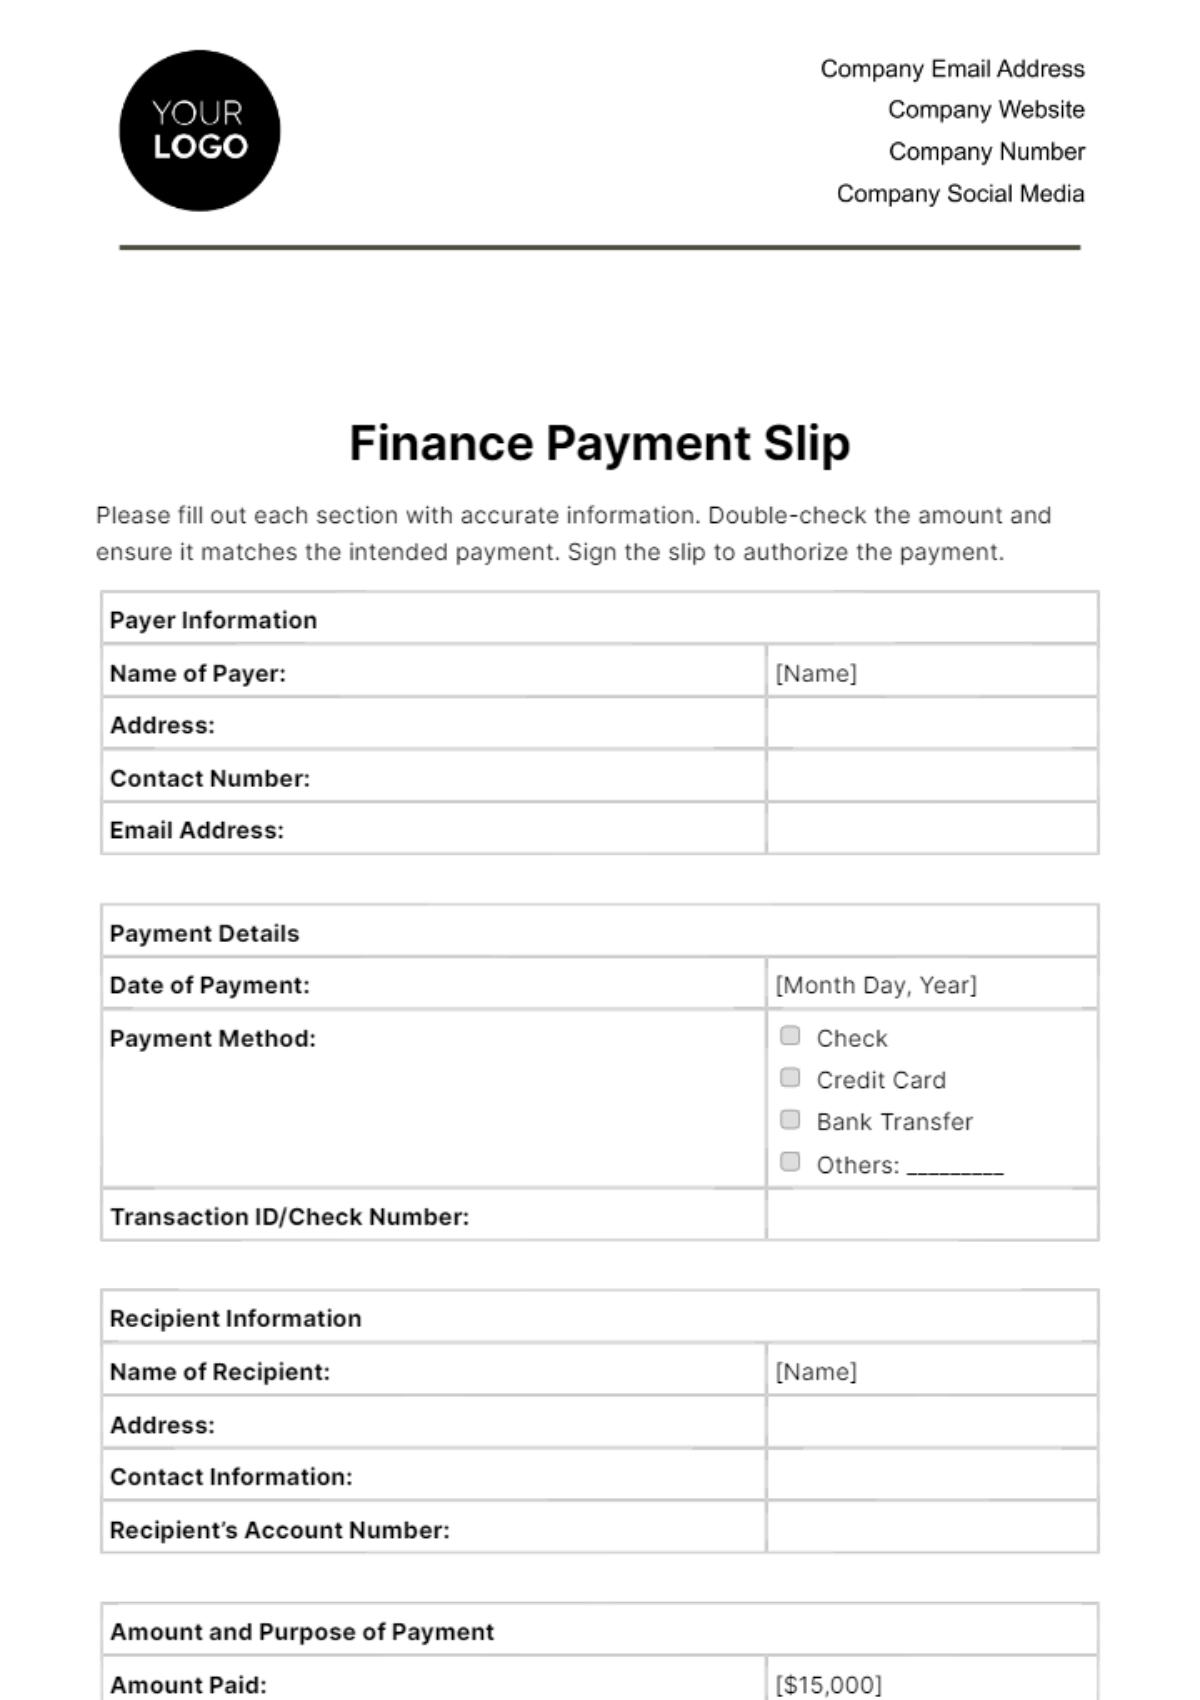 Free Finance Payment Slip Template